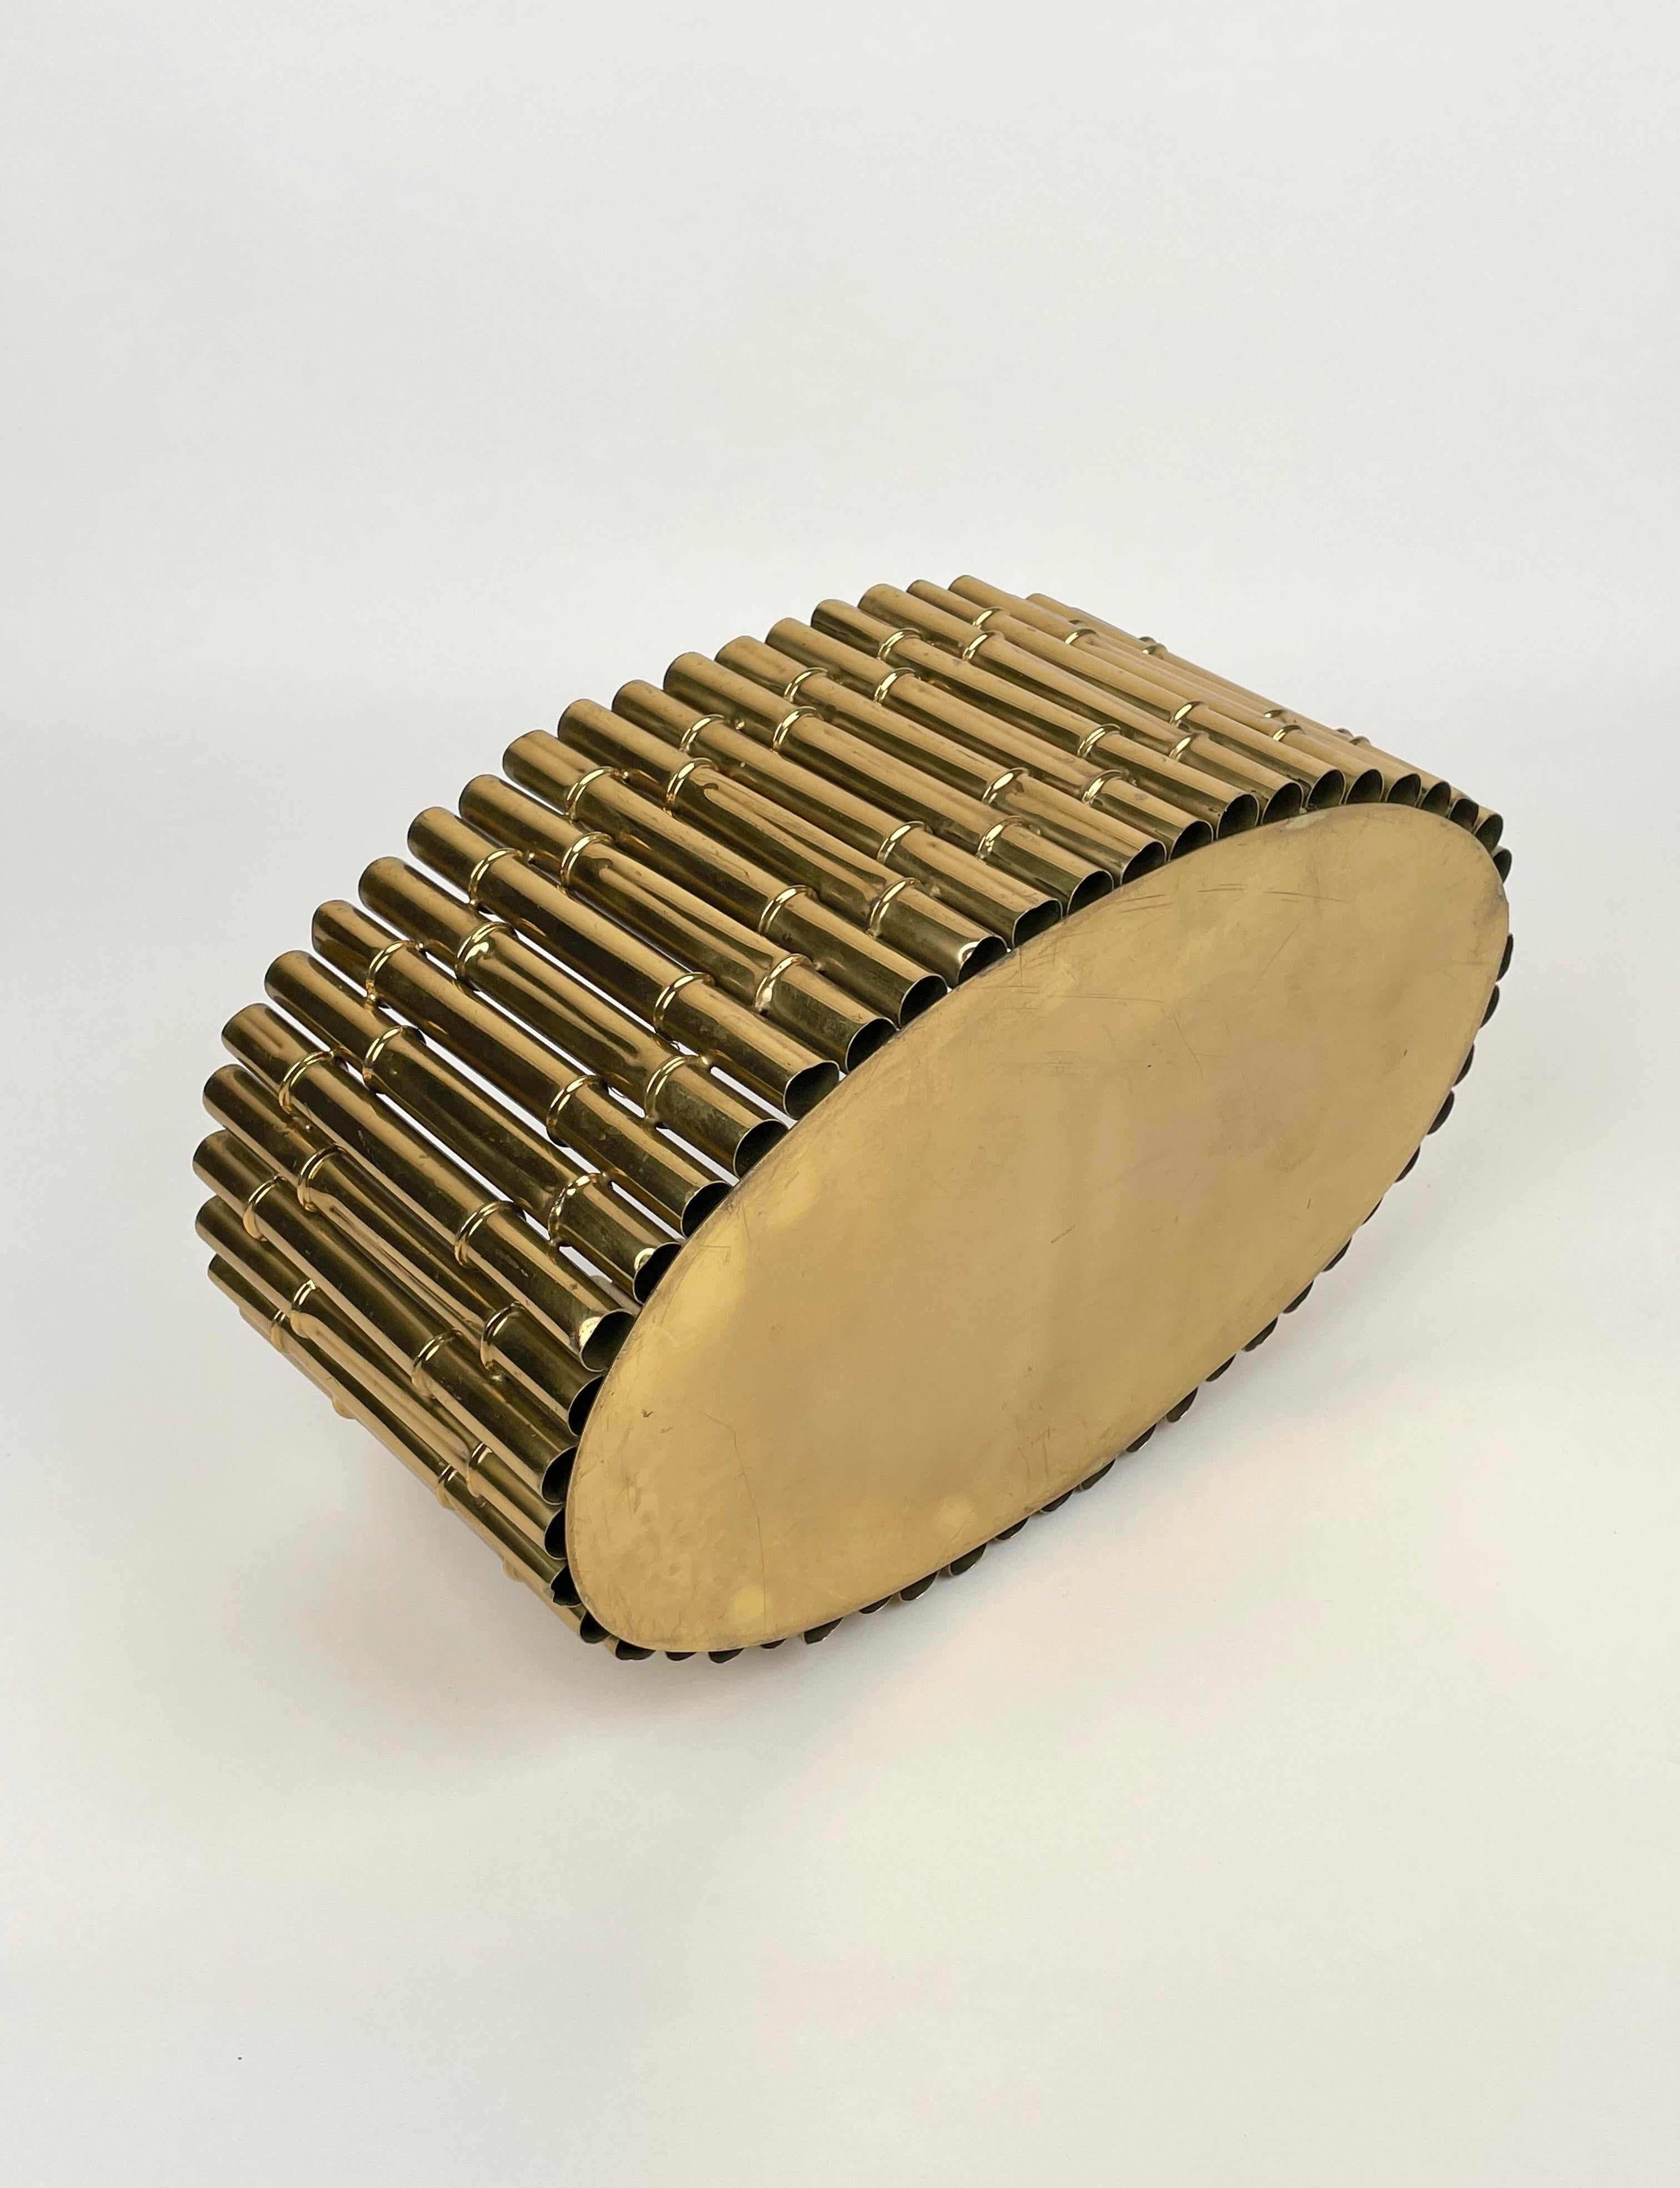 Brass Faux Bamboo Magazine Rack or Basket, by Bottega Gadda, Italy 1970s For Sale 8